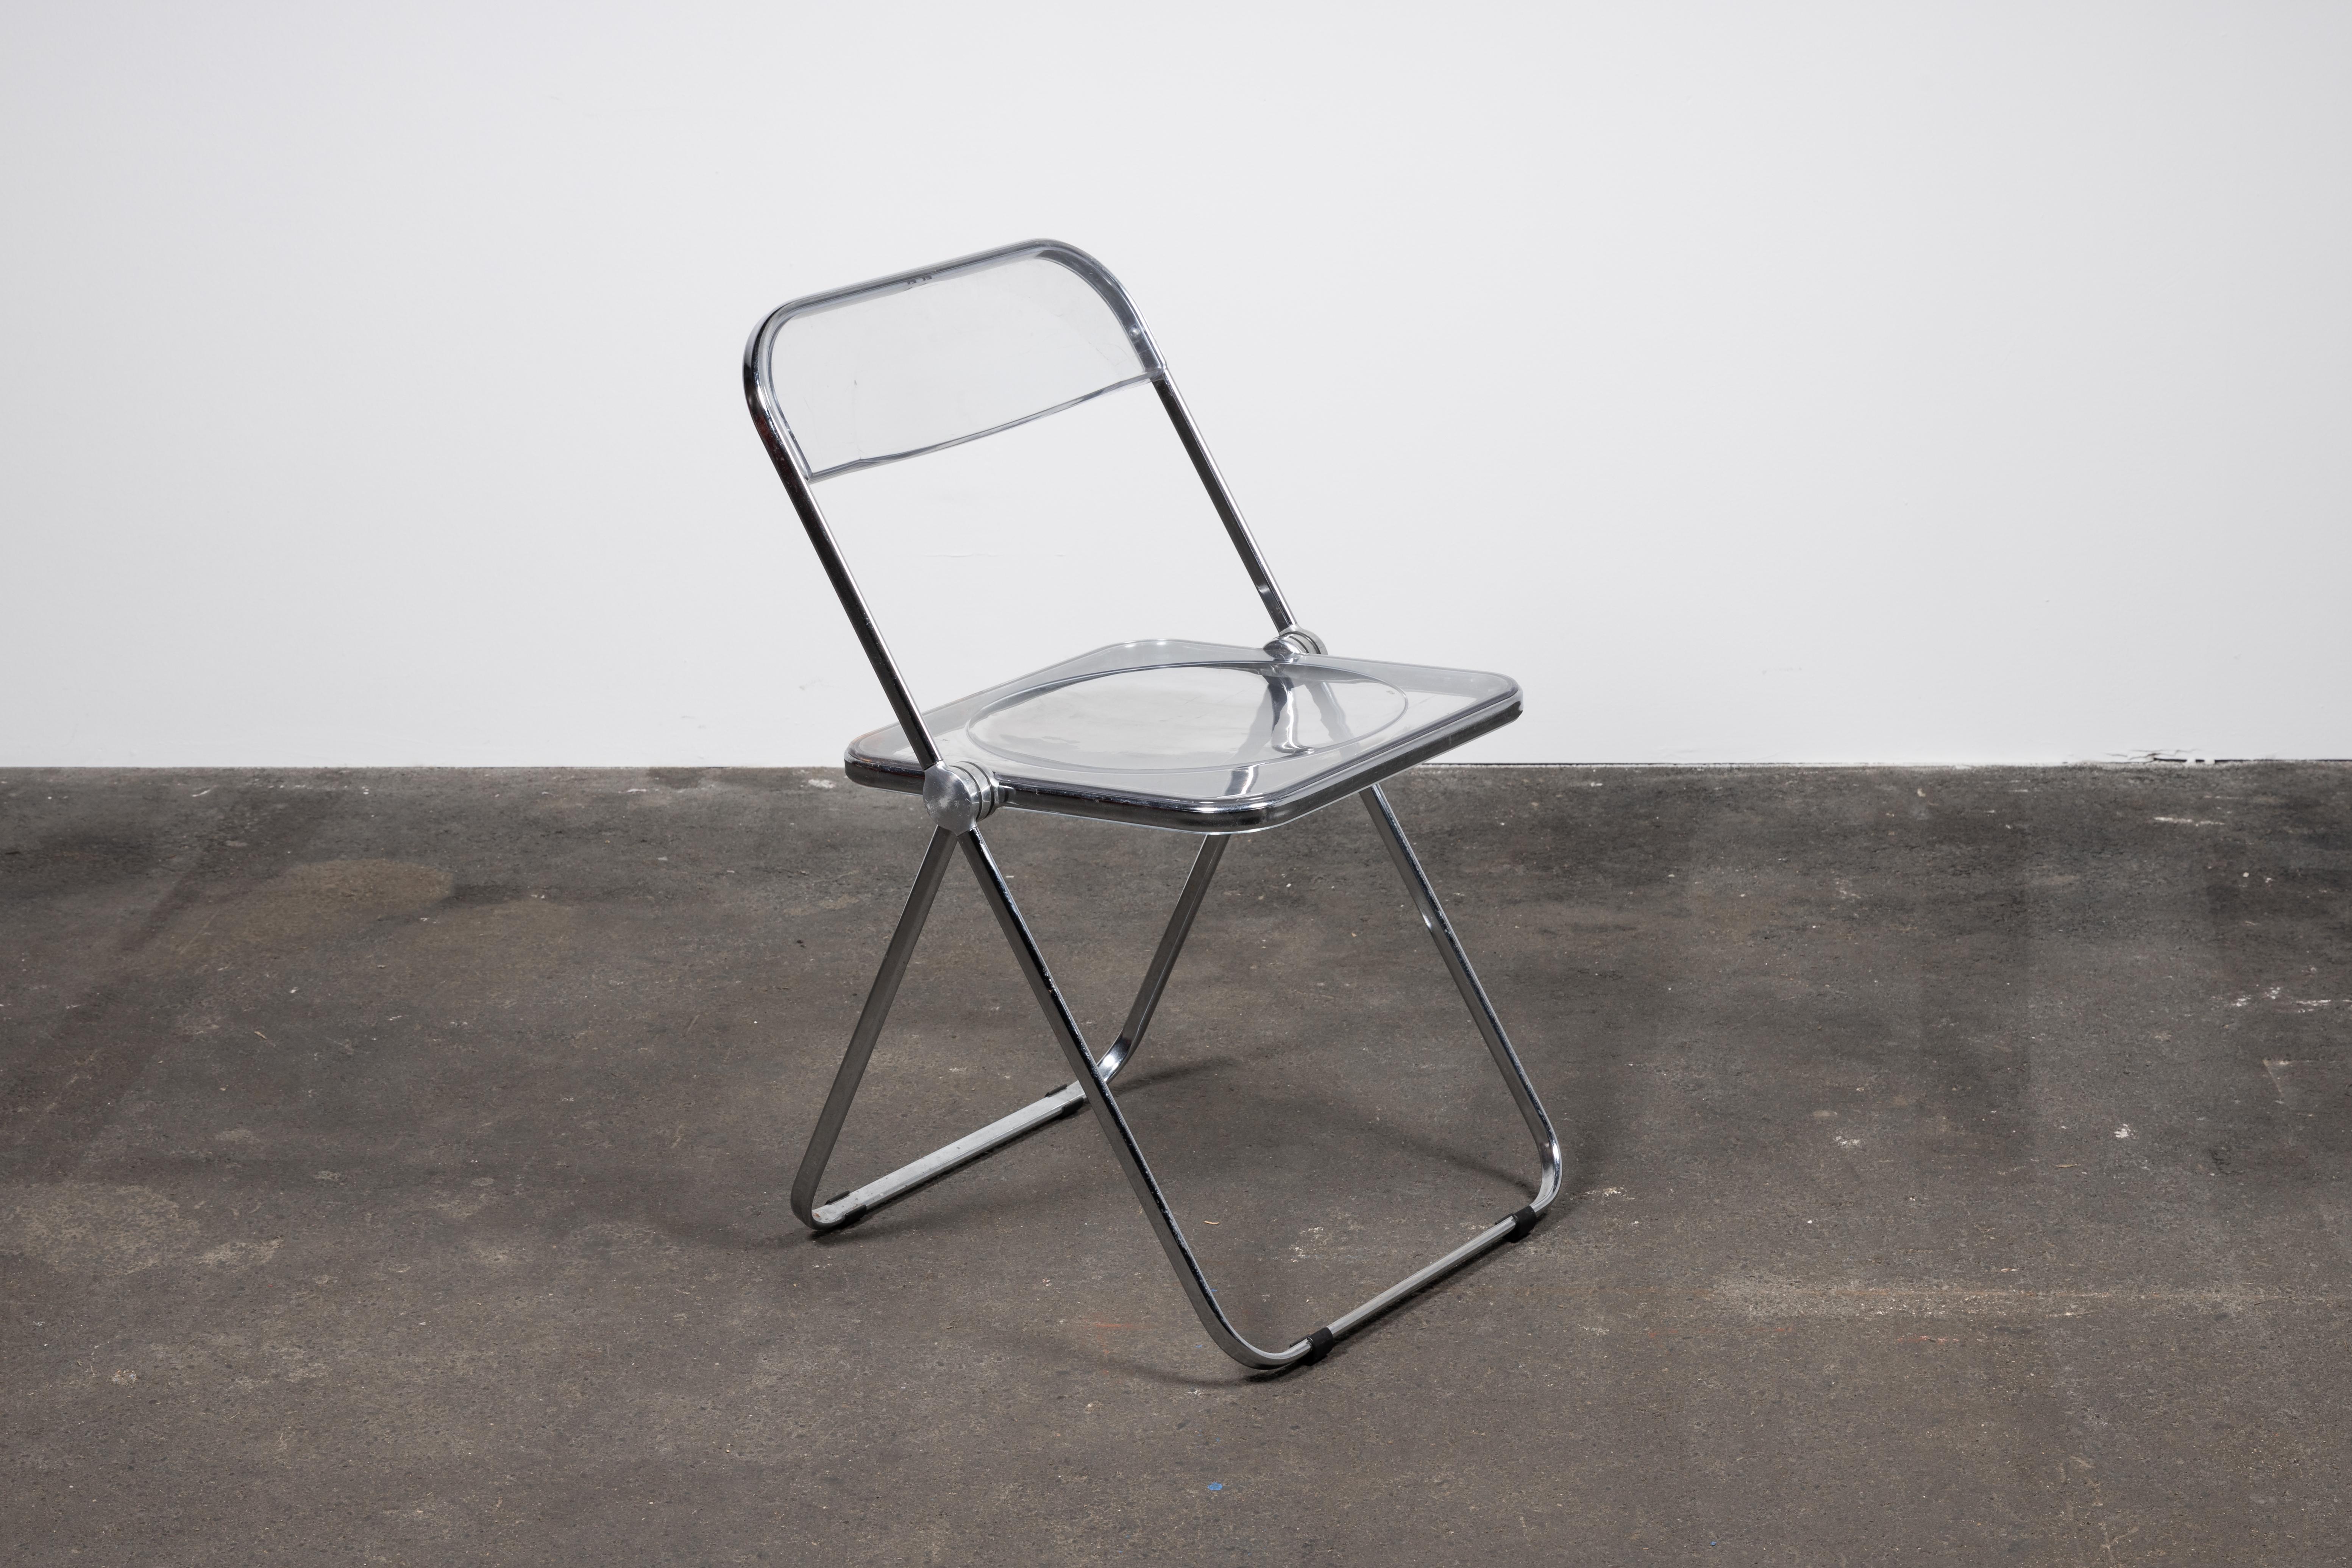 A Space Age chrome and transparent lucite folding chair designed by Giancarlo Piretti for Castelli, Italy. 

With steel frame, seat and back in clear lucite, it represents the realization of “democratic design” and is exhibited at the MoMa museum in